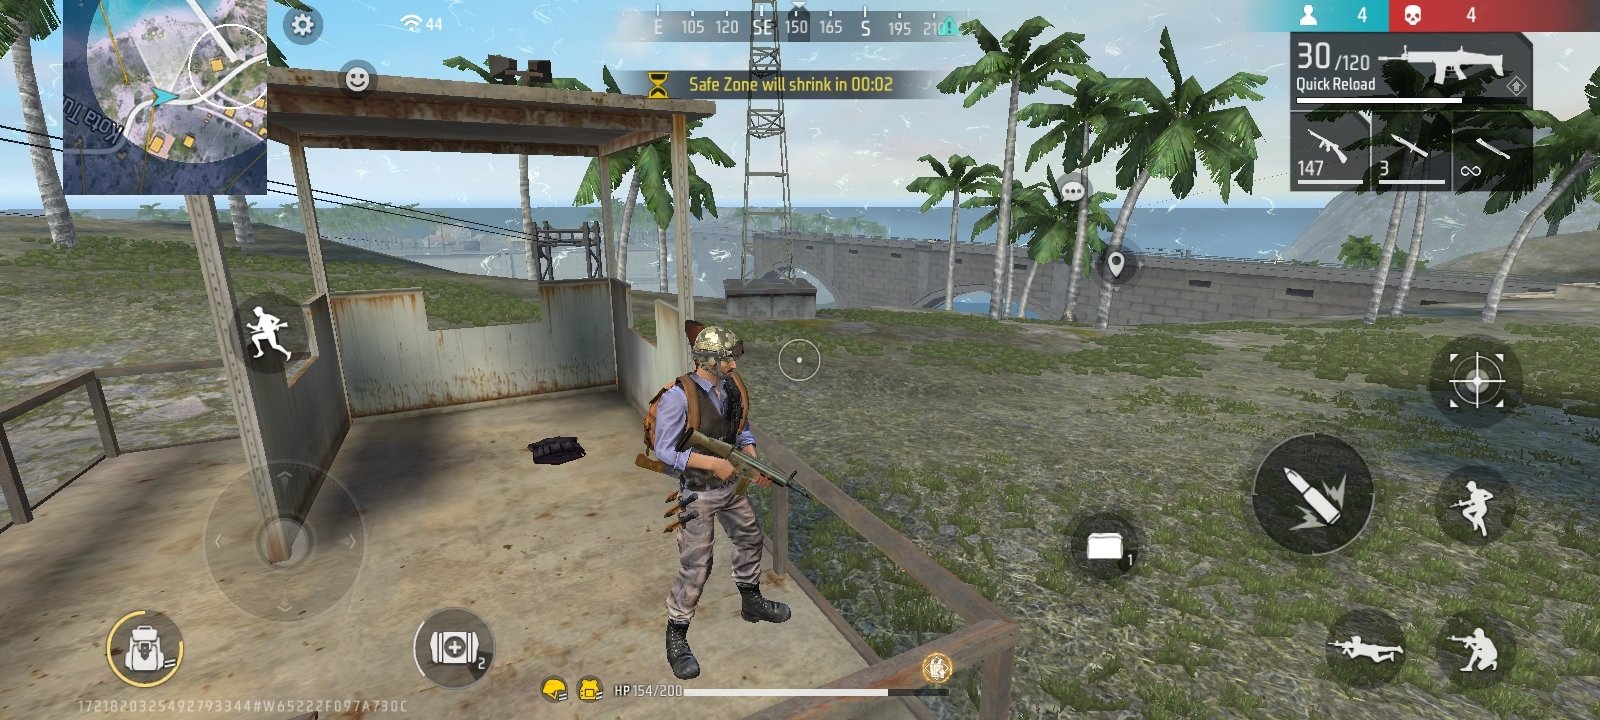 Free Fire APK Download for Android Free